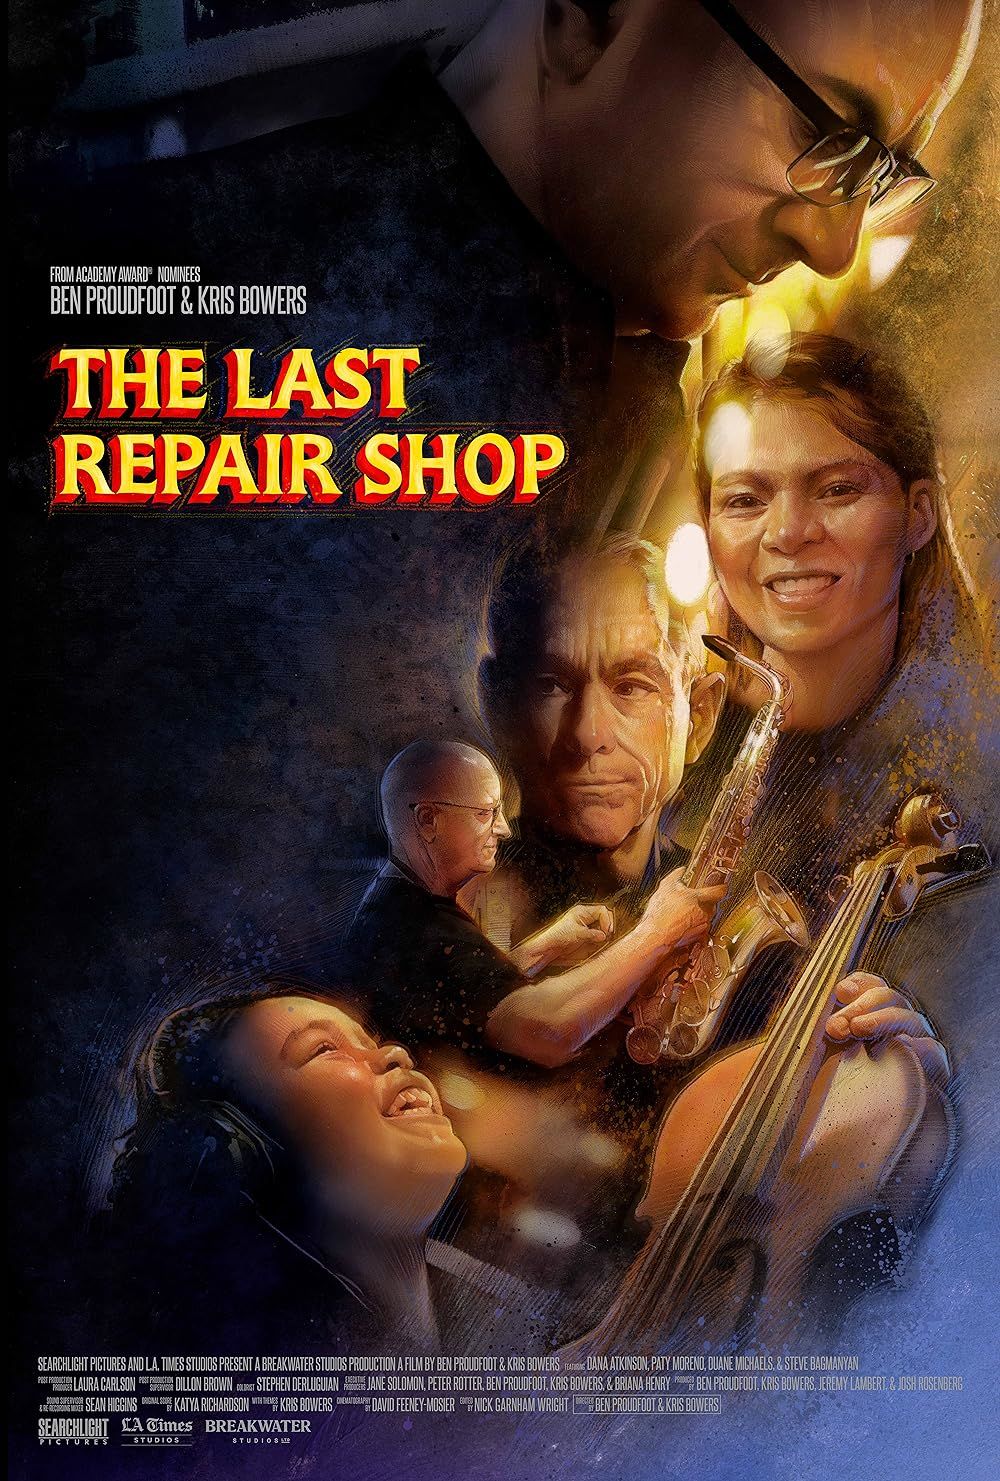 Craftspeople working on instruments as a student enjoys music in The Last Repair Shop